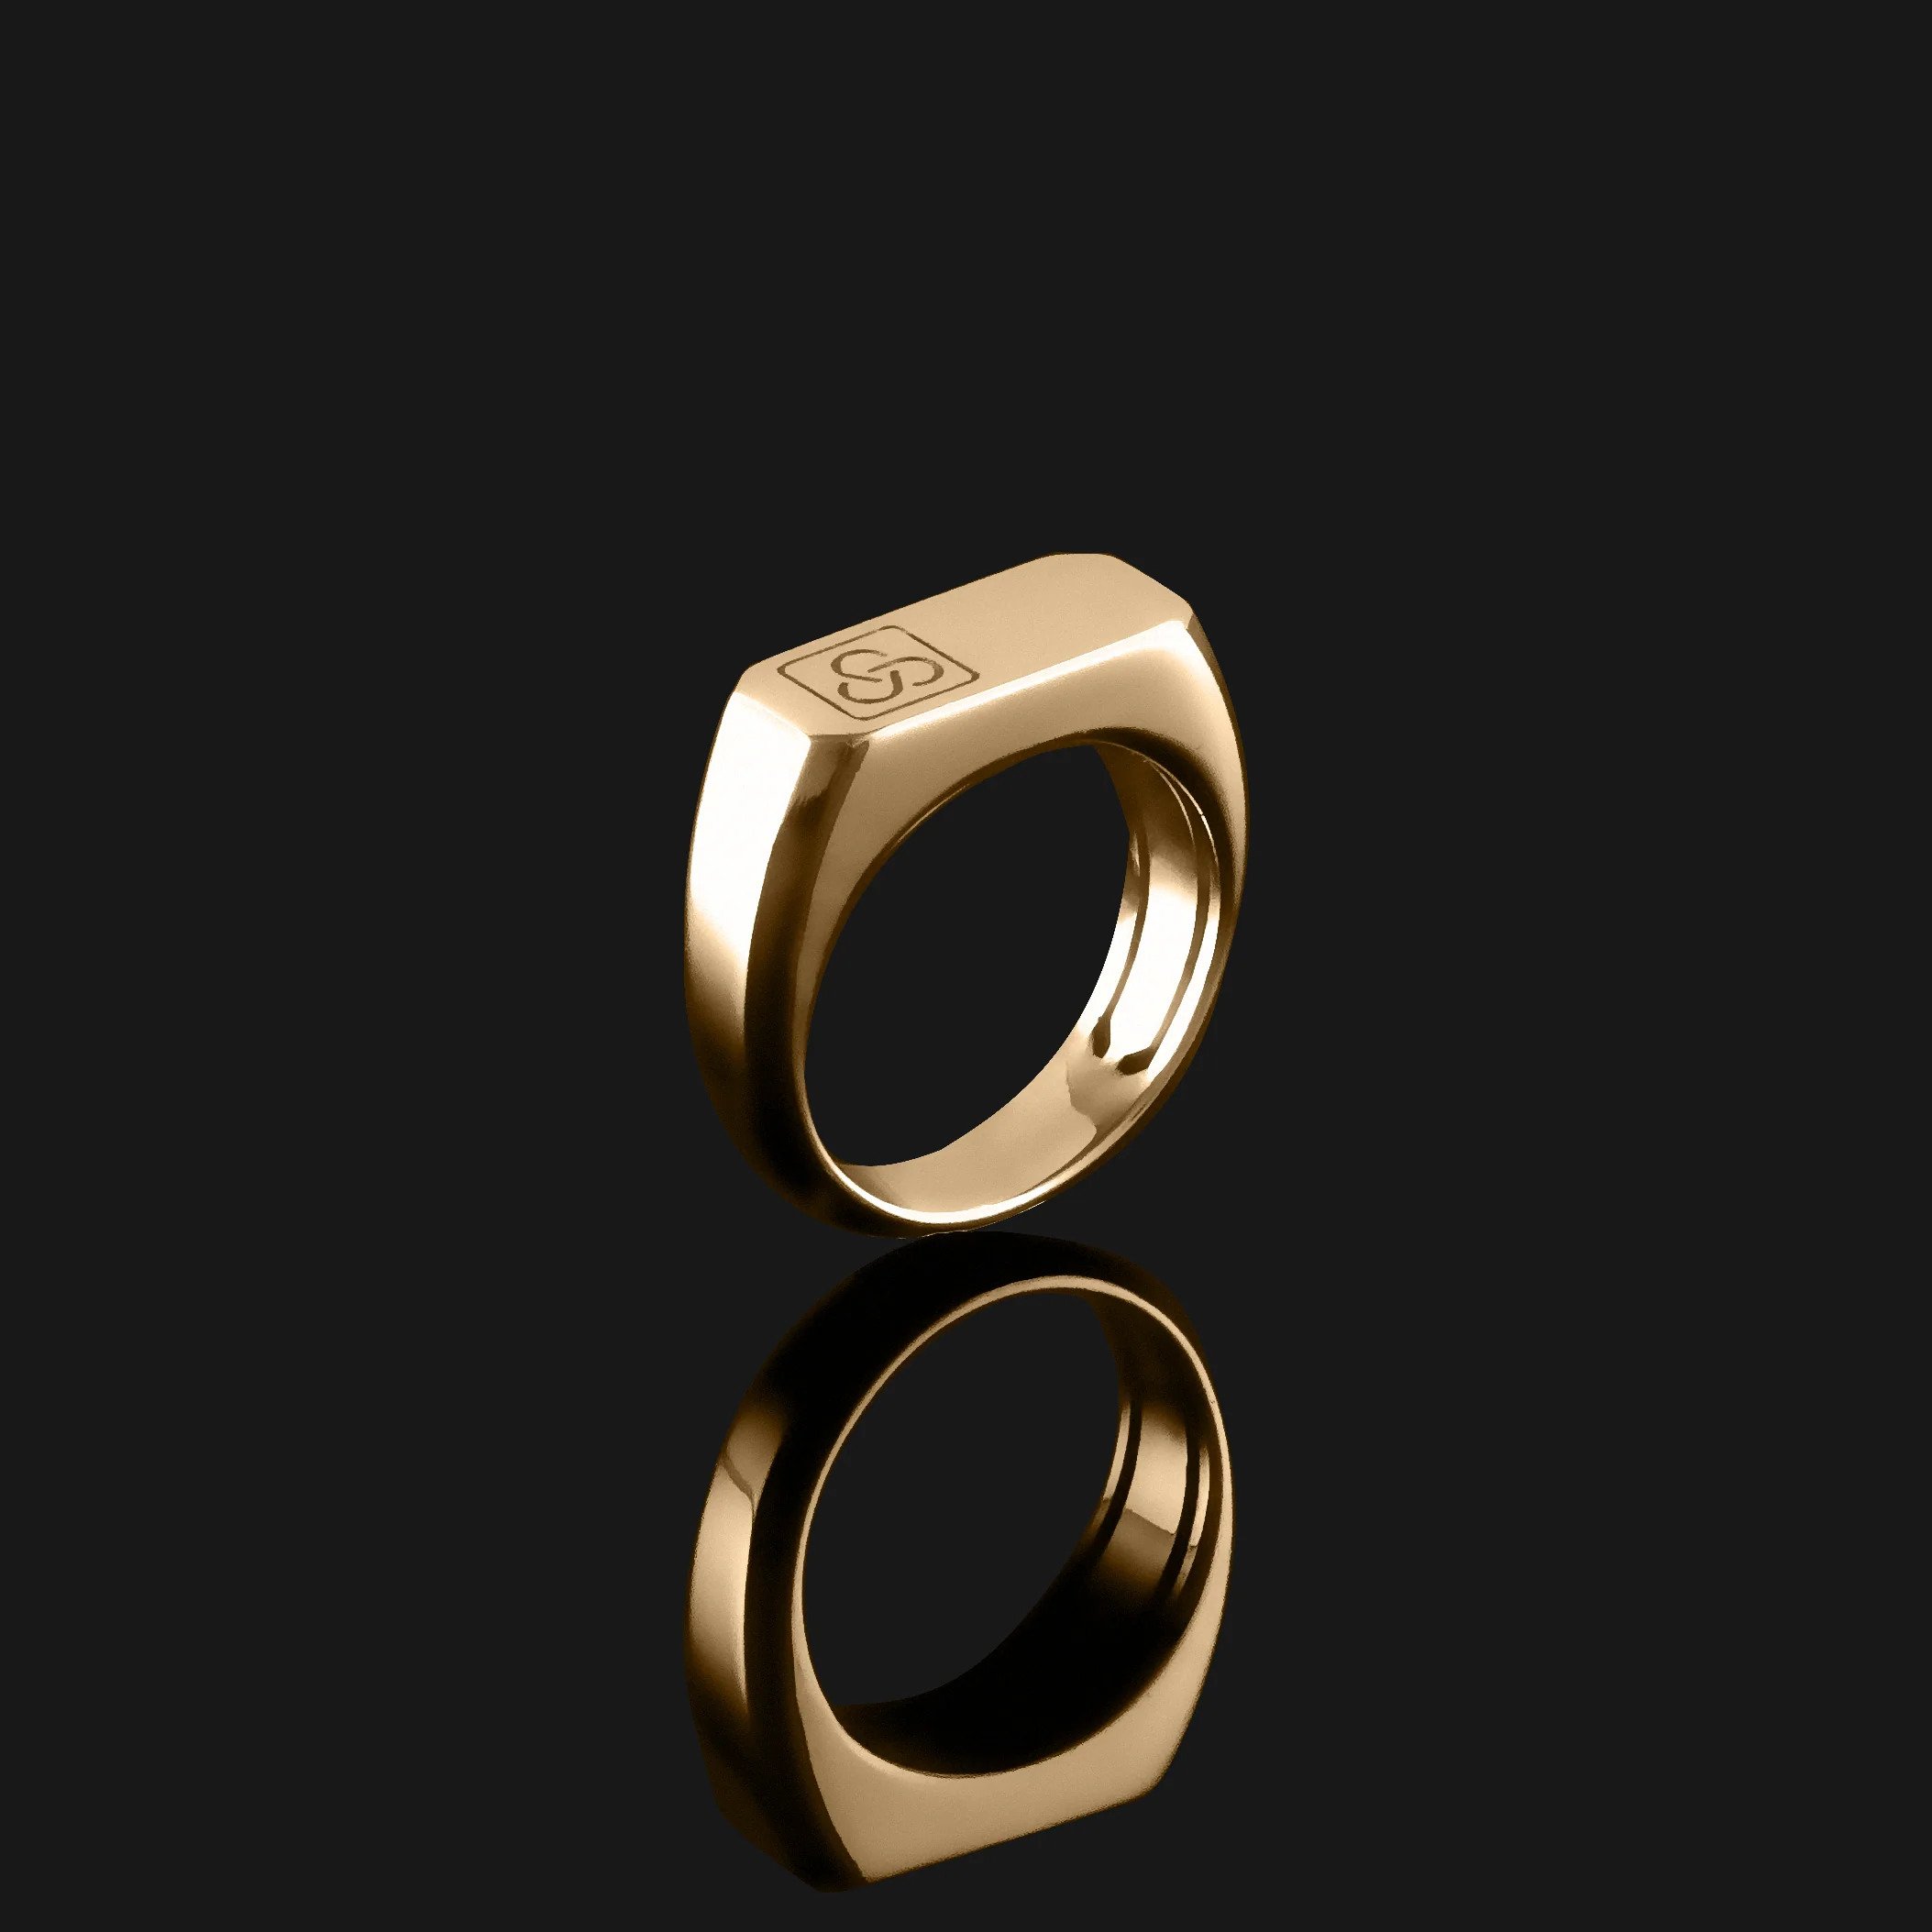 ecommerce jewelry photography with a gold ring